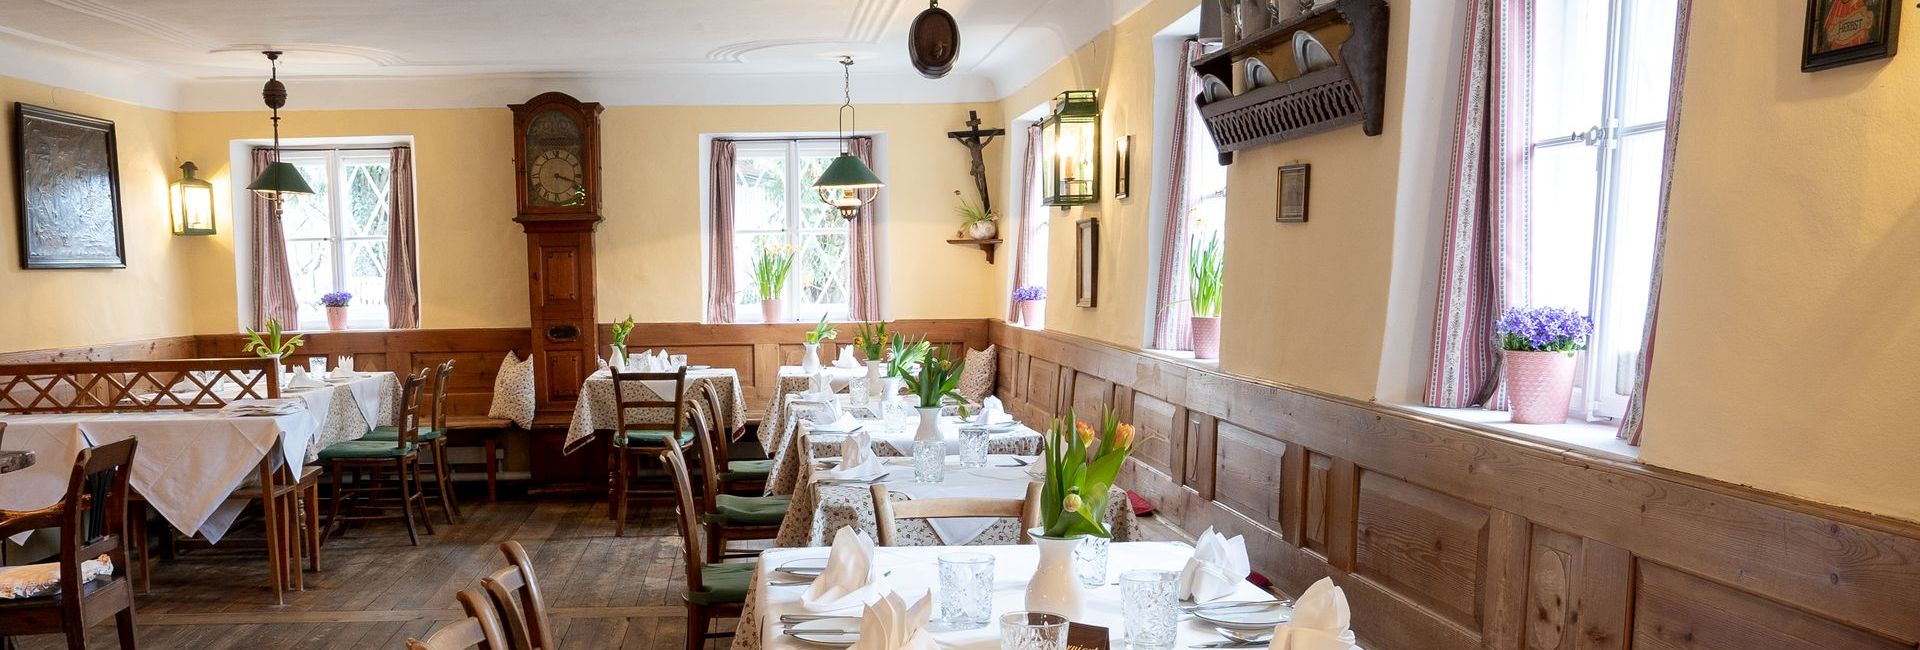 Gourmet restaurant with traditional furniture at Schlosswirt zu Anif in the south of Salzburg